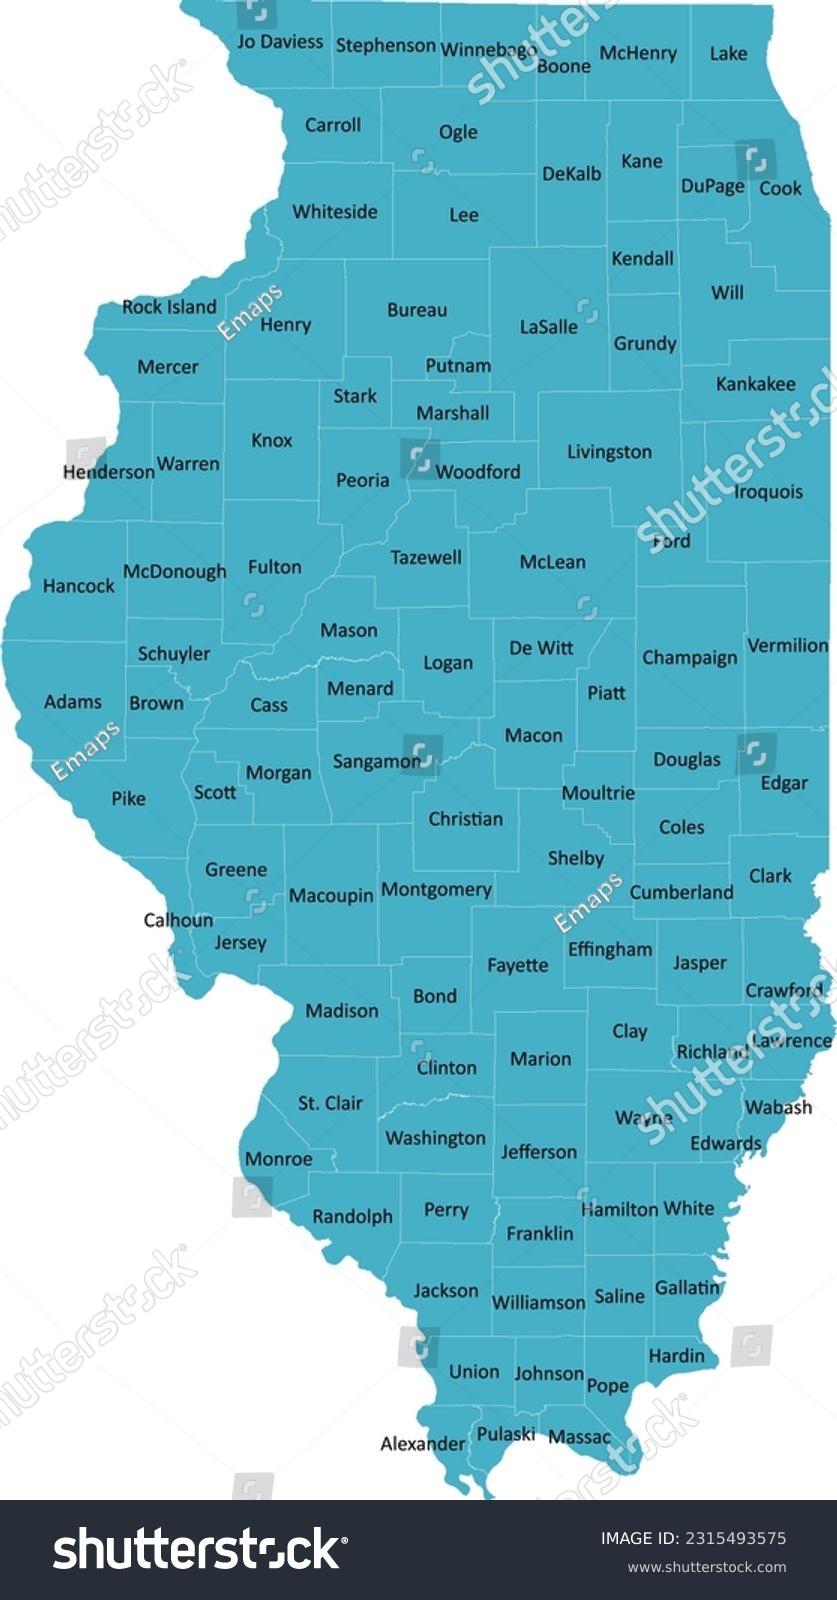 US Illinois county map with 102 Counties’ Names and Boundaries, all text in one layer could be hidden. #2315493575